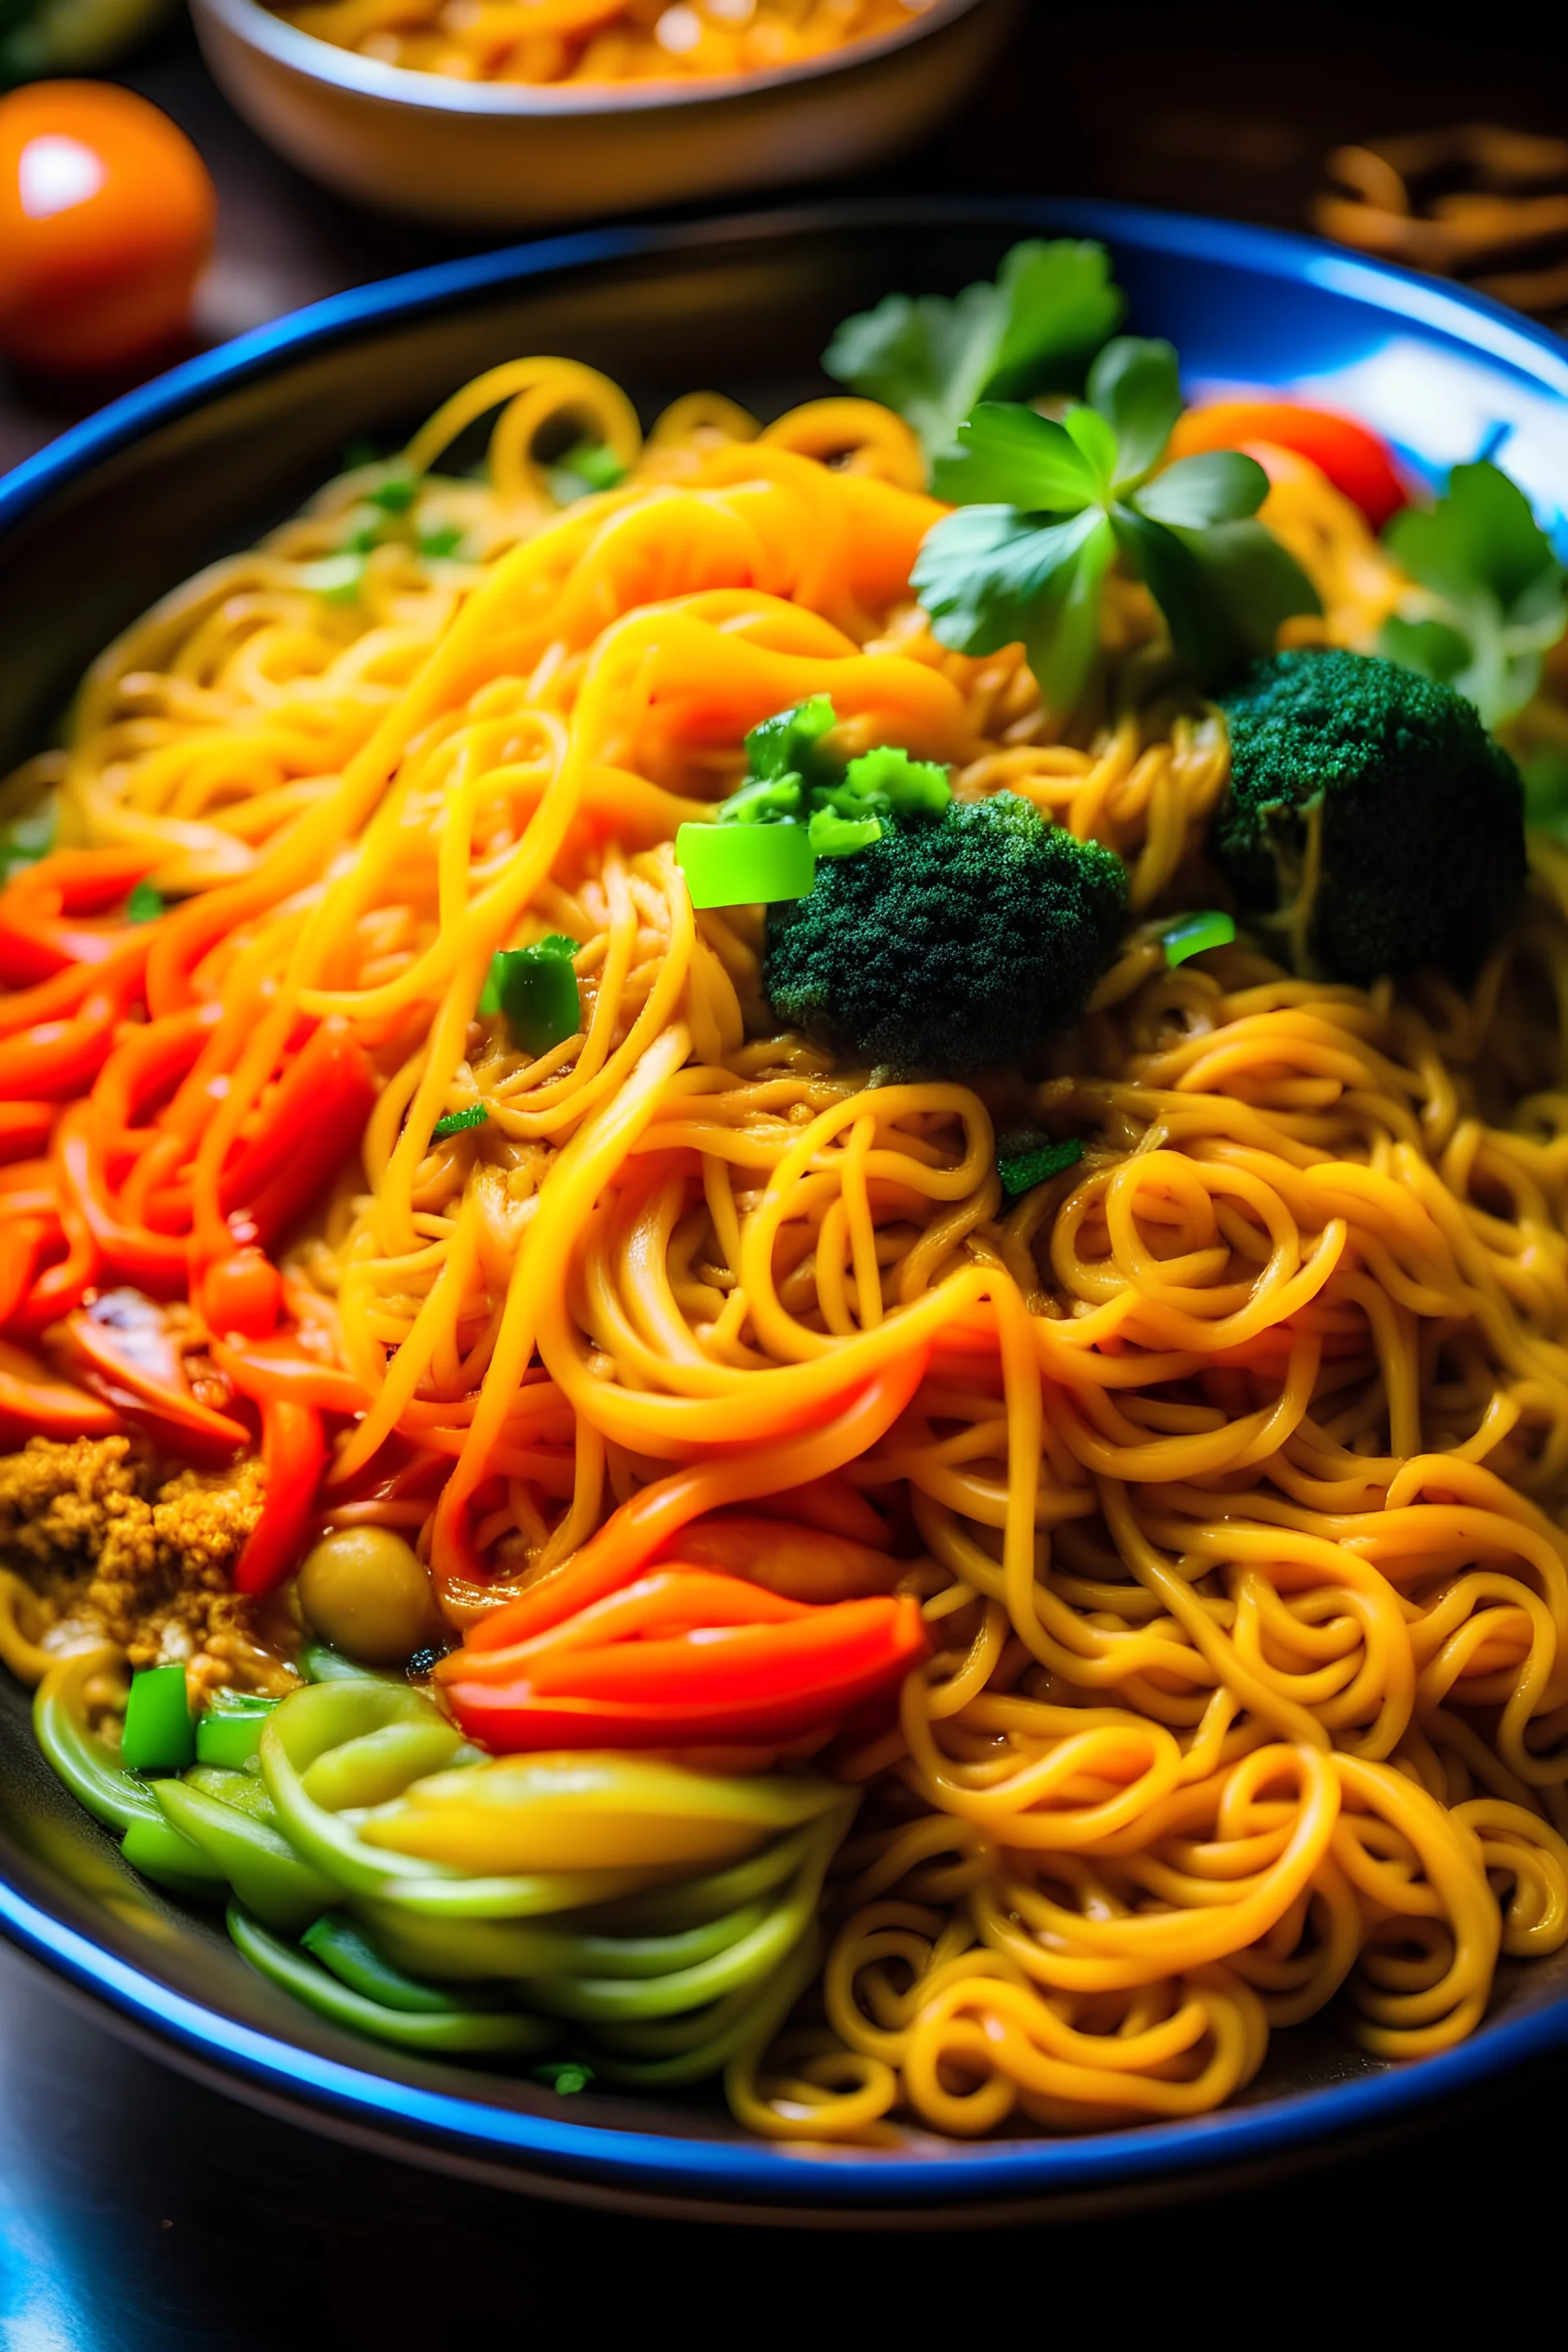 perfectly cooked , golden brown noodles with colourful vegetables